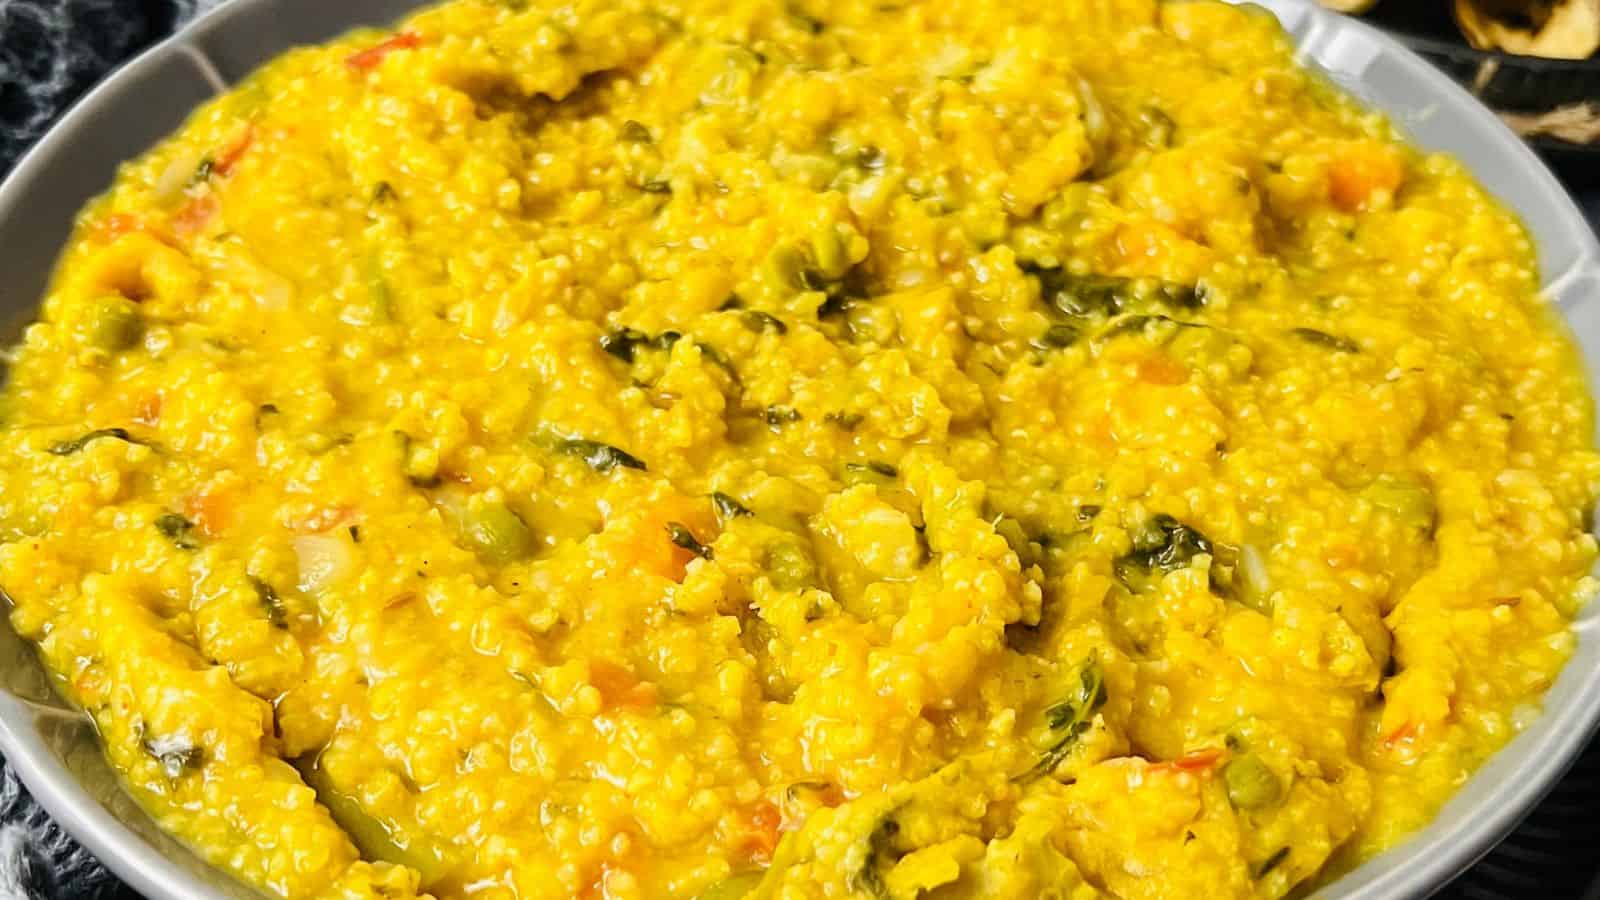 A close-up image of a bowl of khichdi, a traditional indian dish made of rice and lentils mixed with vegetables and spices.